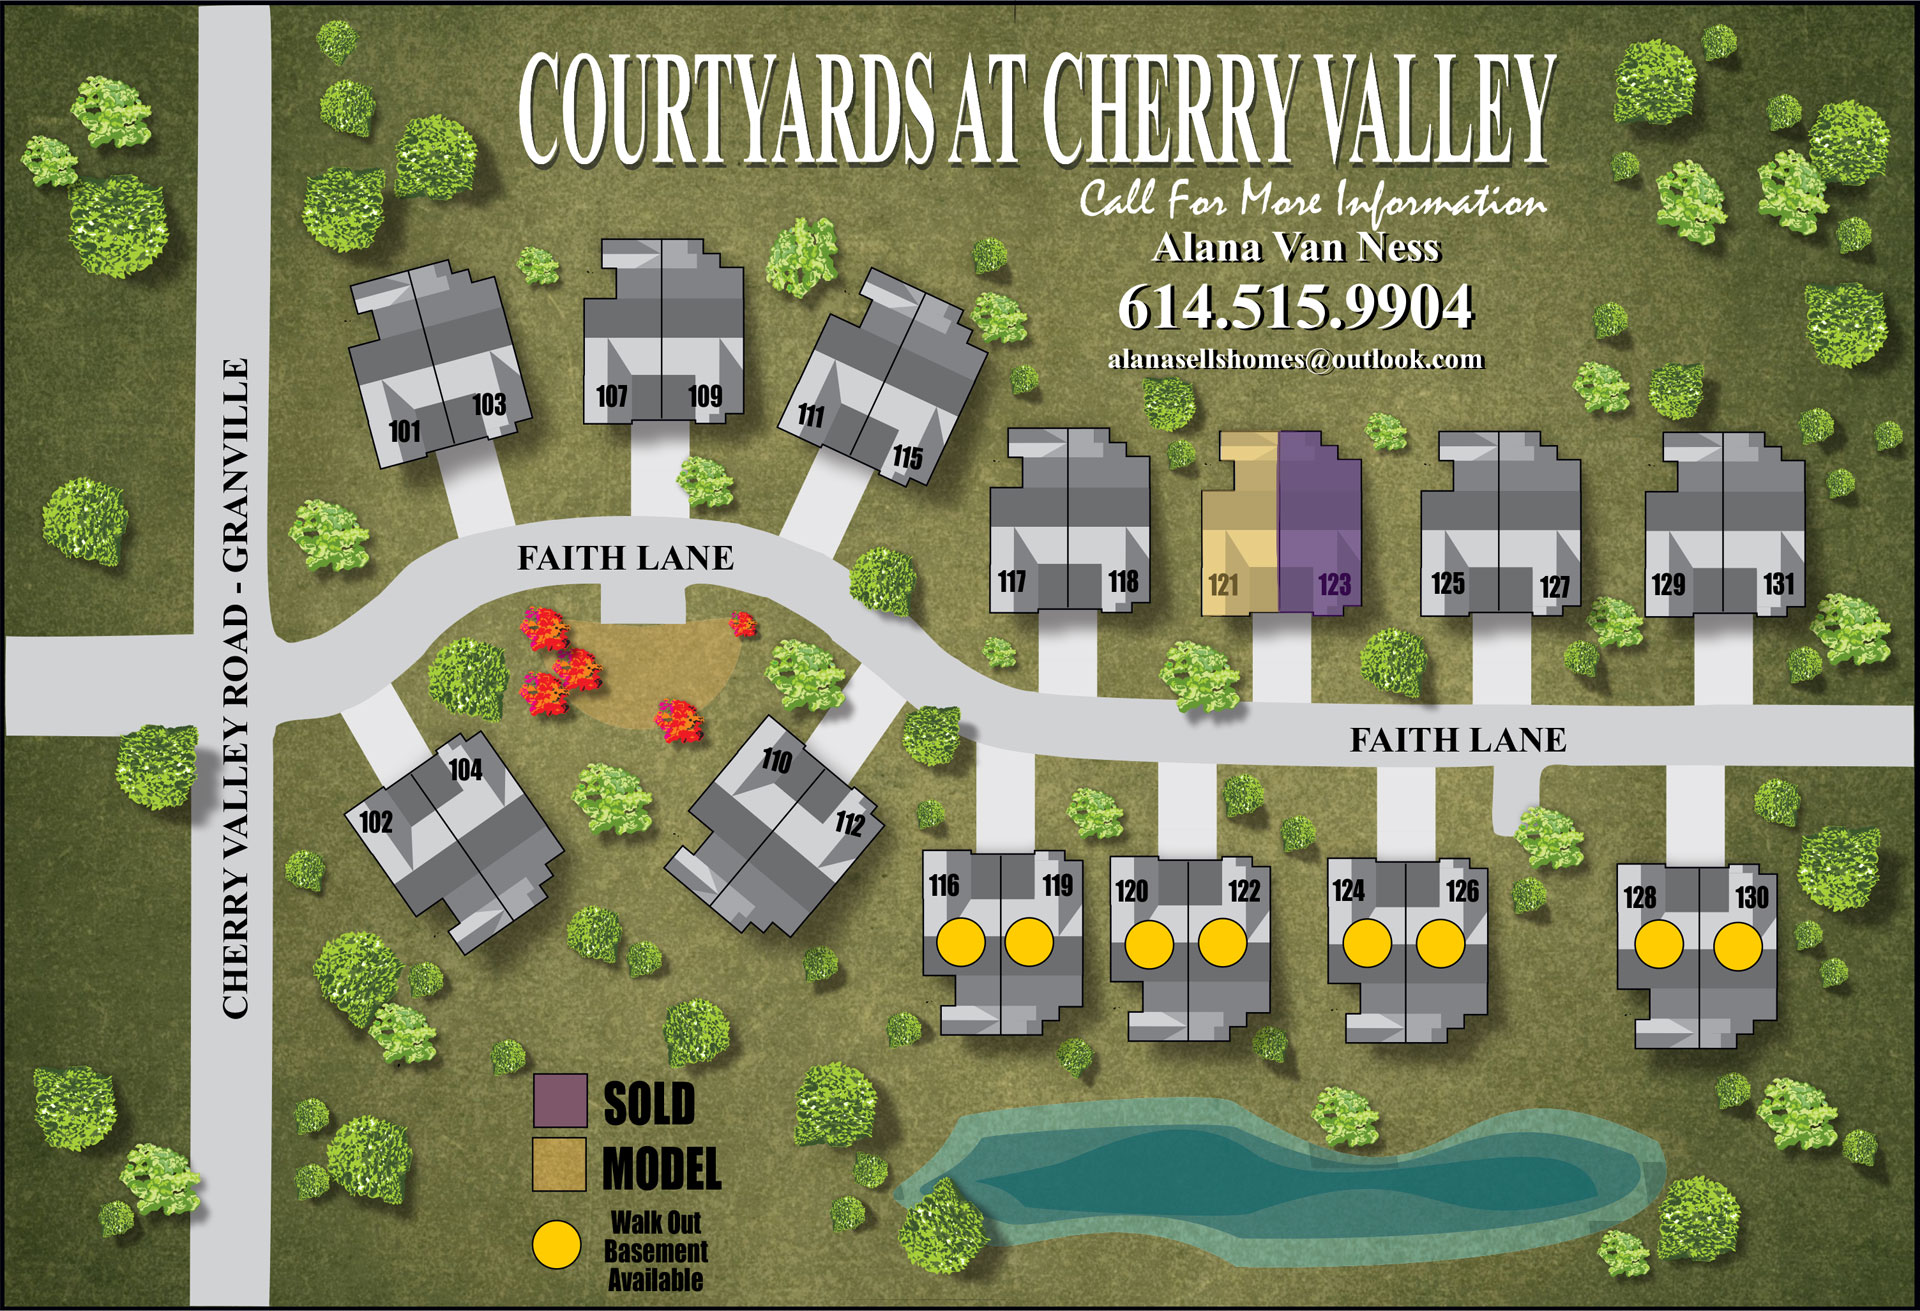 Courtyards at Cherry Valley